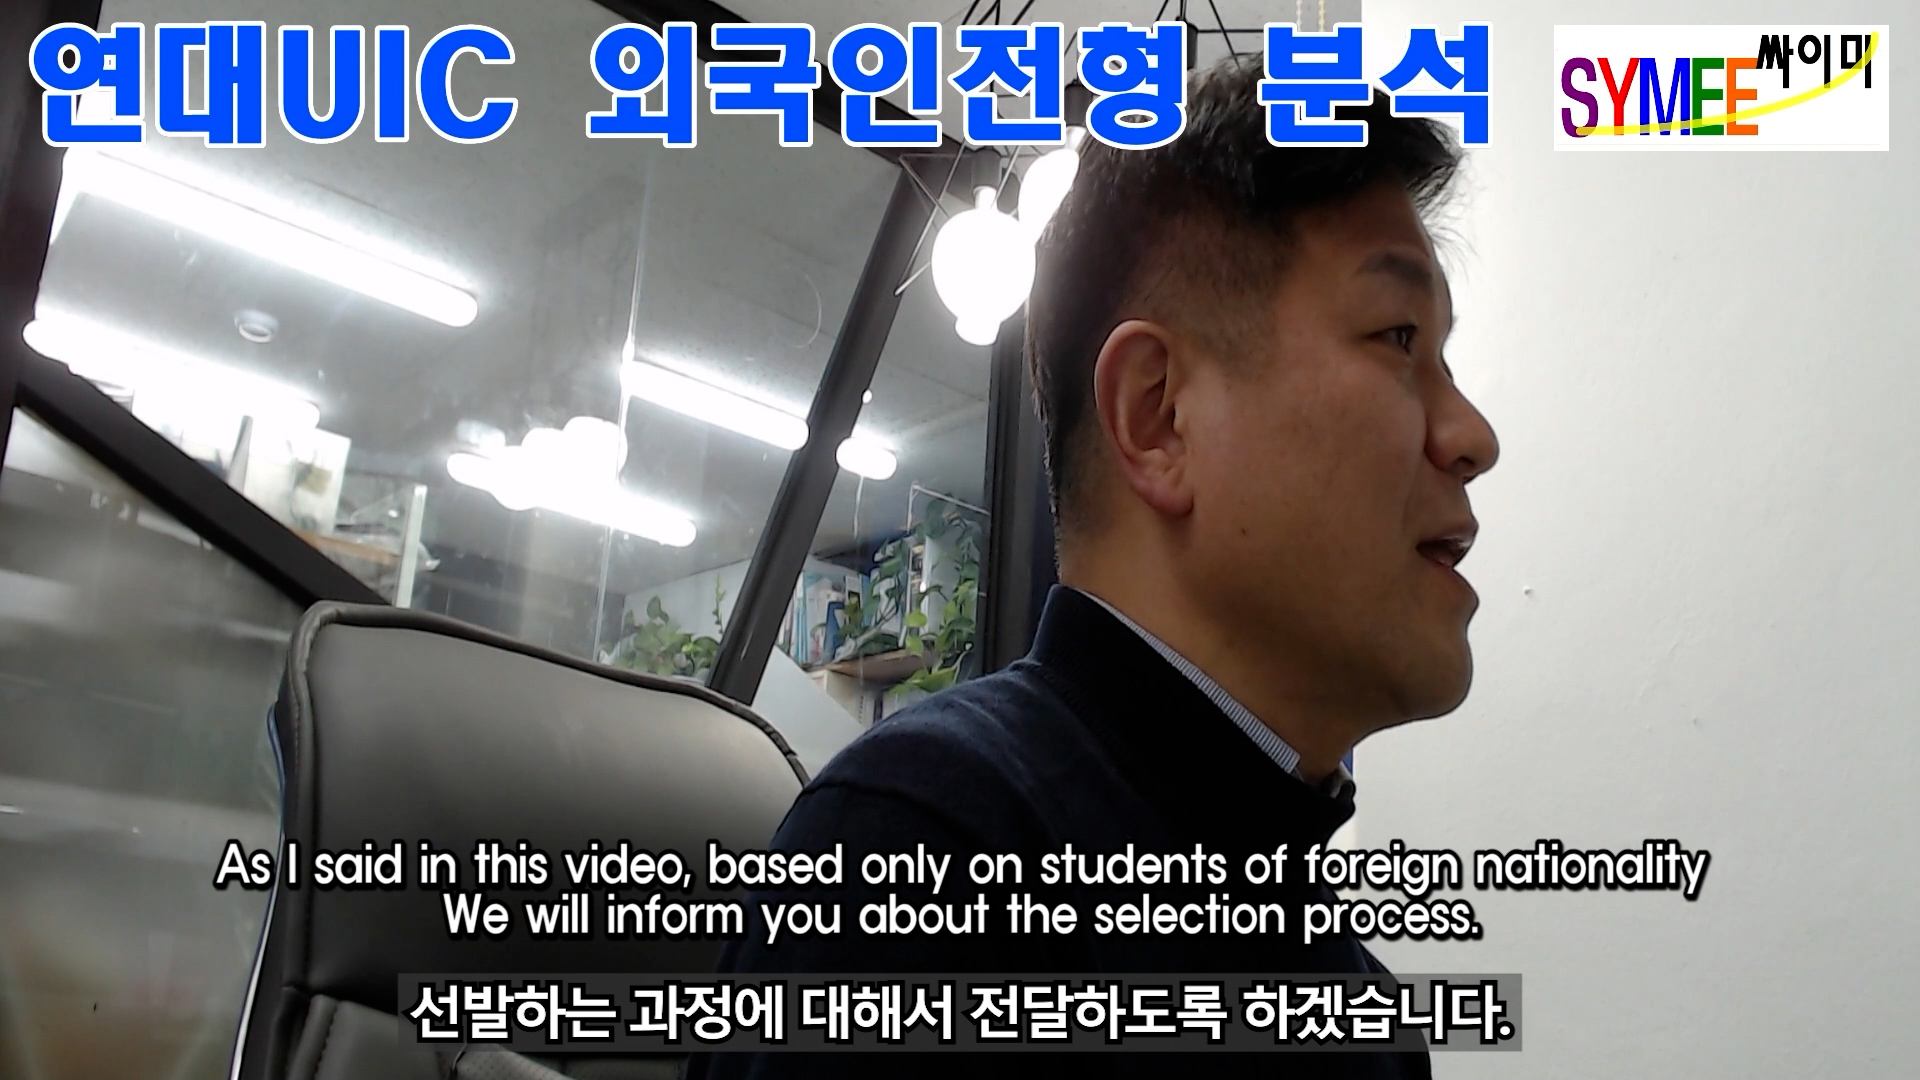 Yonsei Univ. Admission for UIC for Foreign Student 02 Qualifications.00_02_54_55.스틸 007.jpg